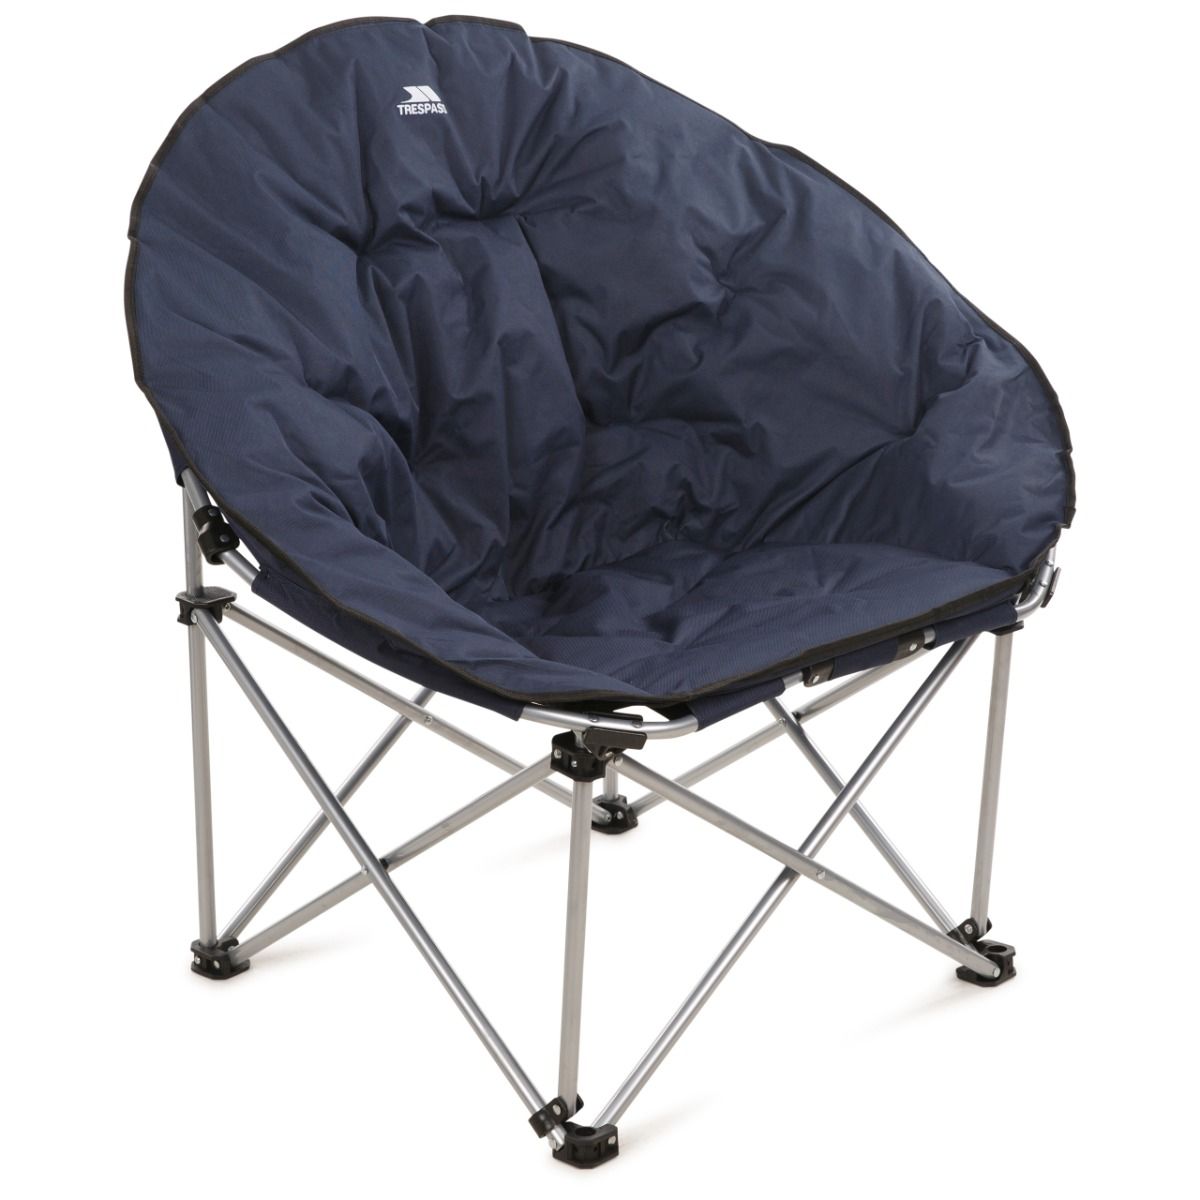 Trespass Oversized Moon Chair Camping Folding Padded Tycho